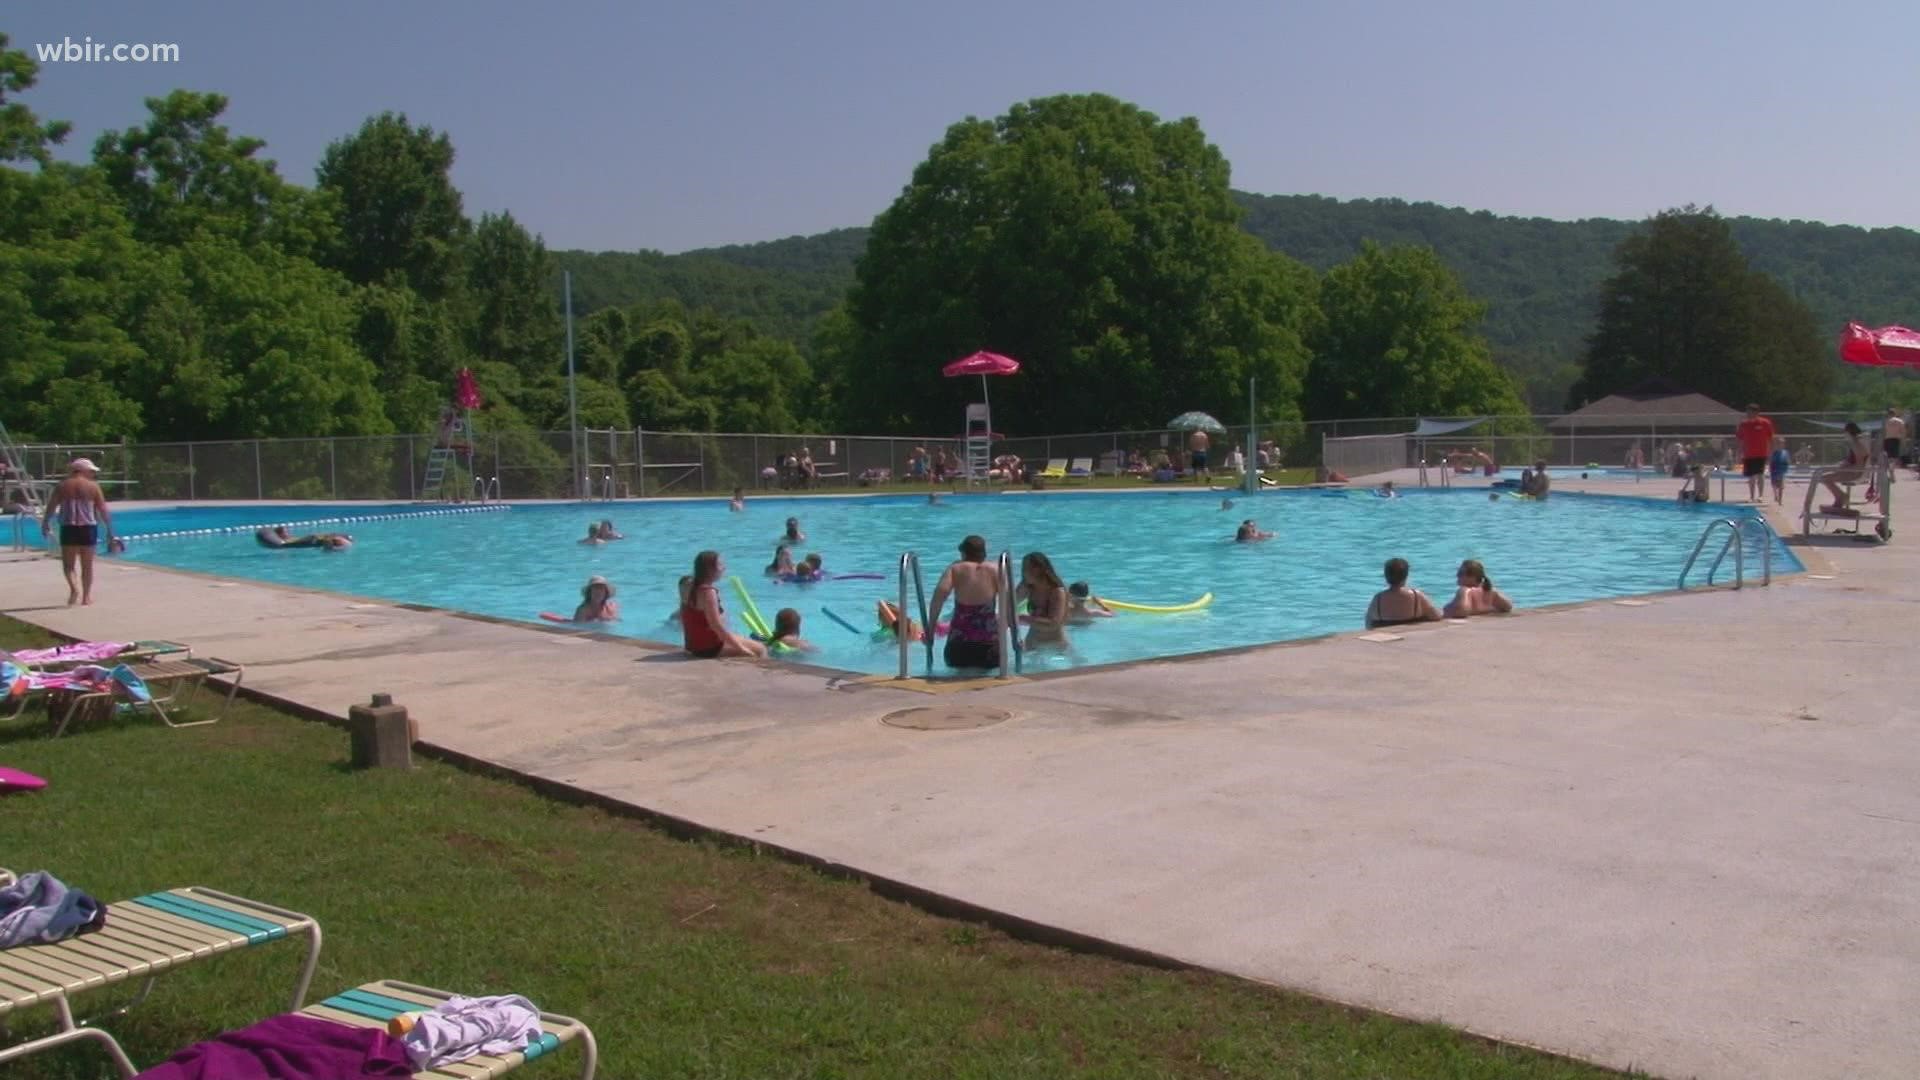 Leaders in Hamblen County and Morristown gathered Wednesday, urging state officials to reopen a closed pool in the area.